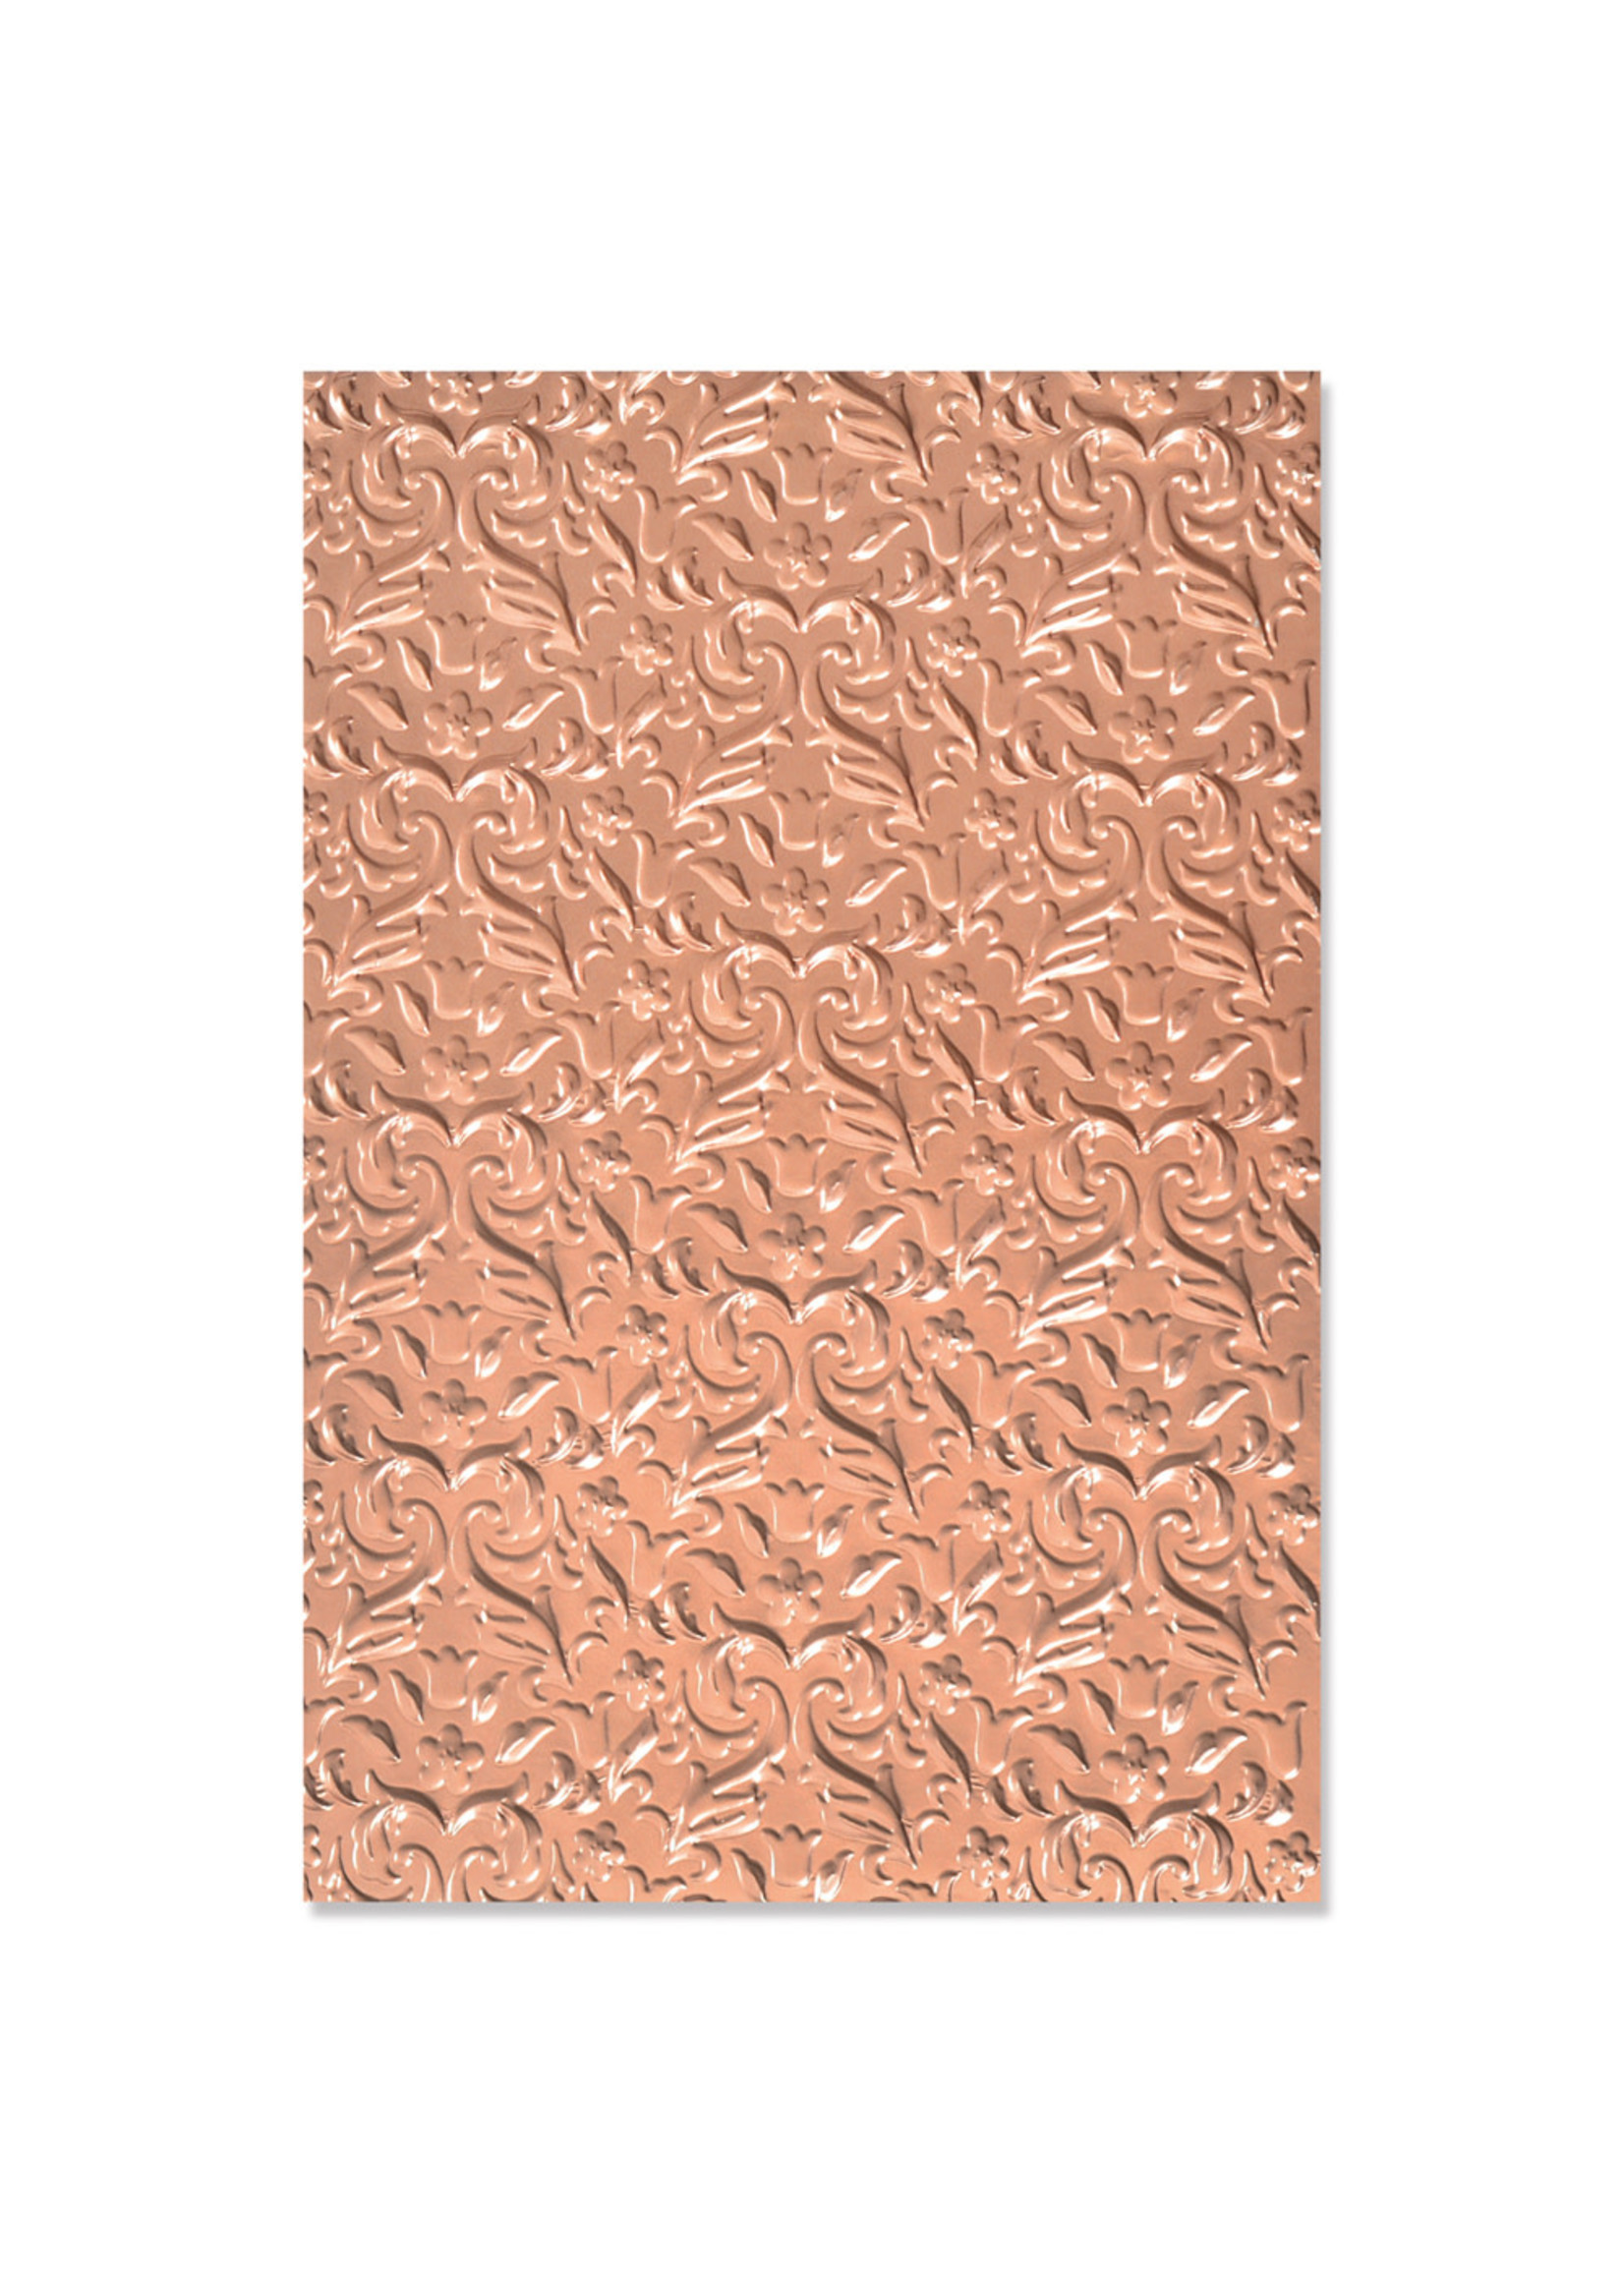 Sizzix Floral Flourishes Textured Impressions Embossing Folder